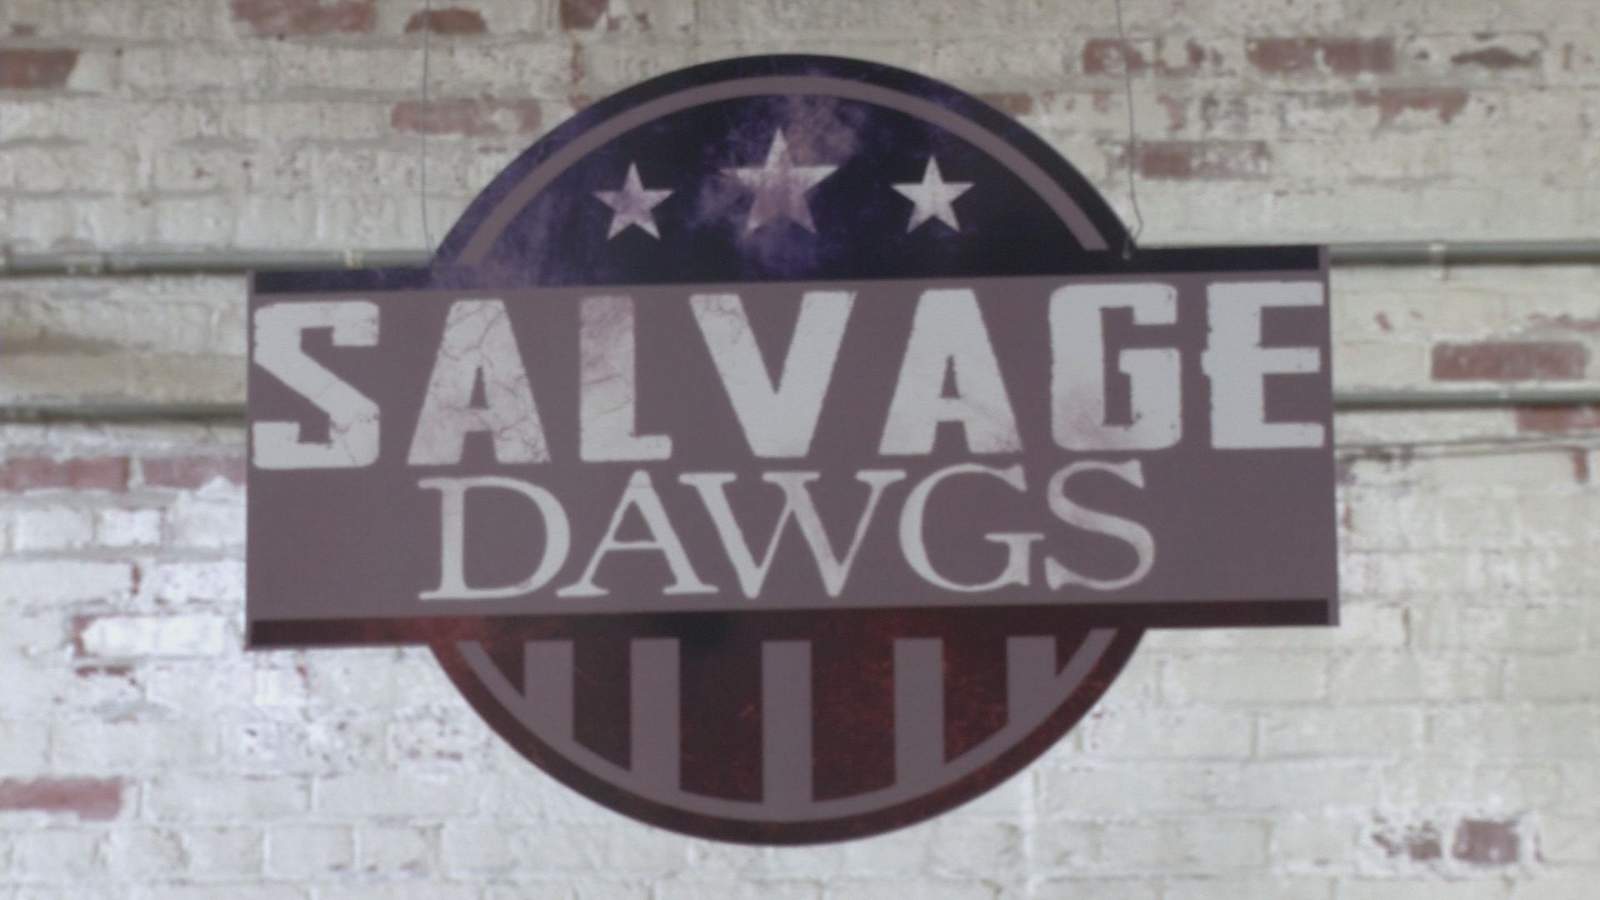 Roanoke-based Salvage Dawgs to end after 11 seasons